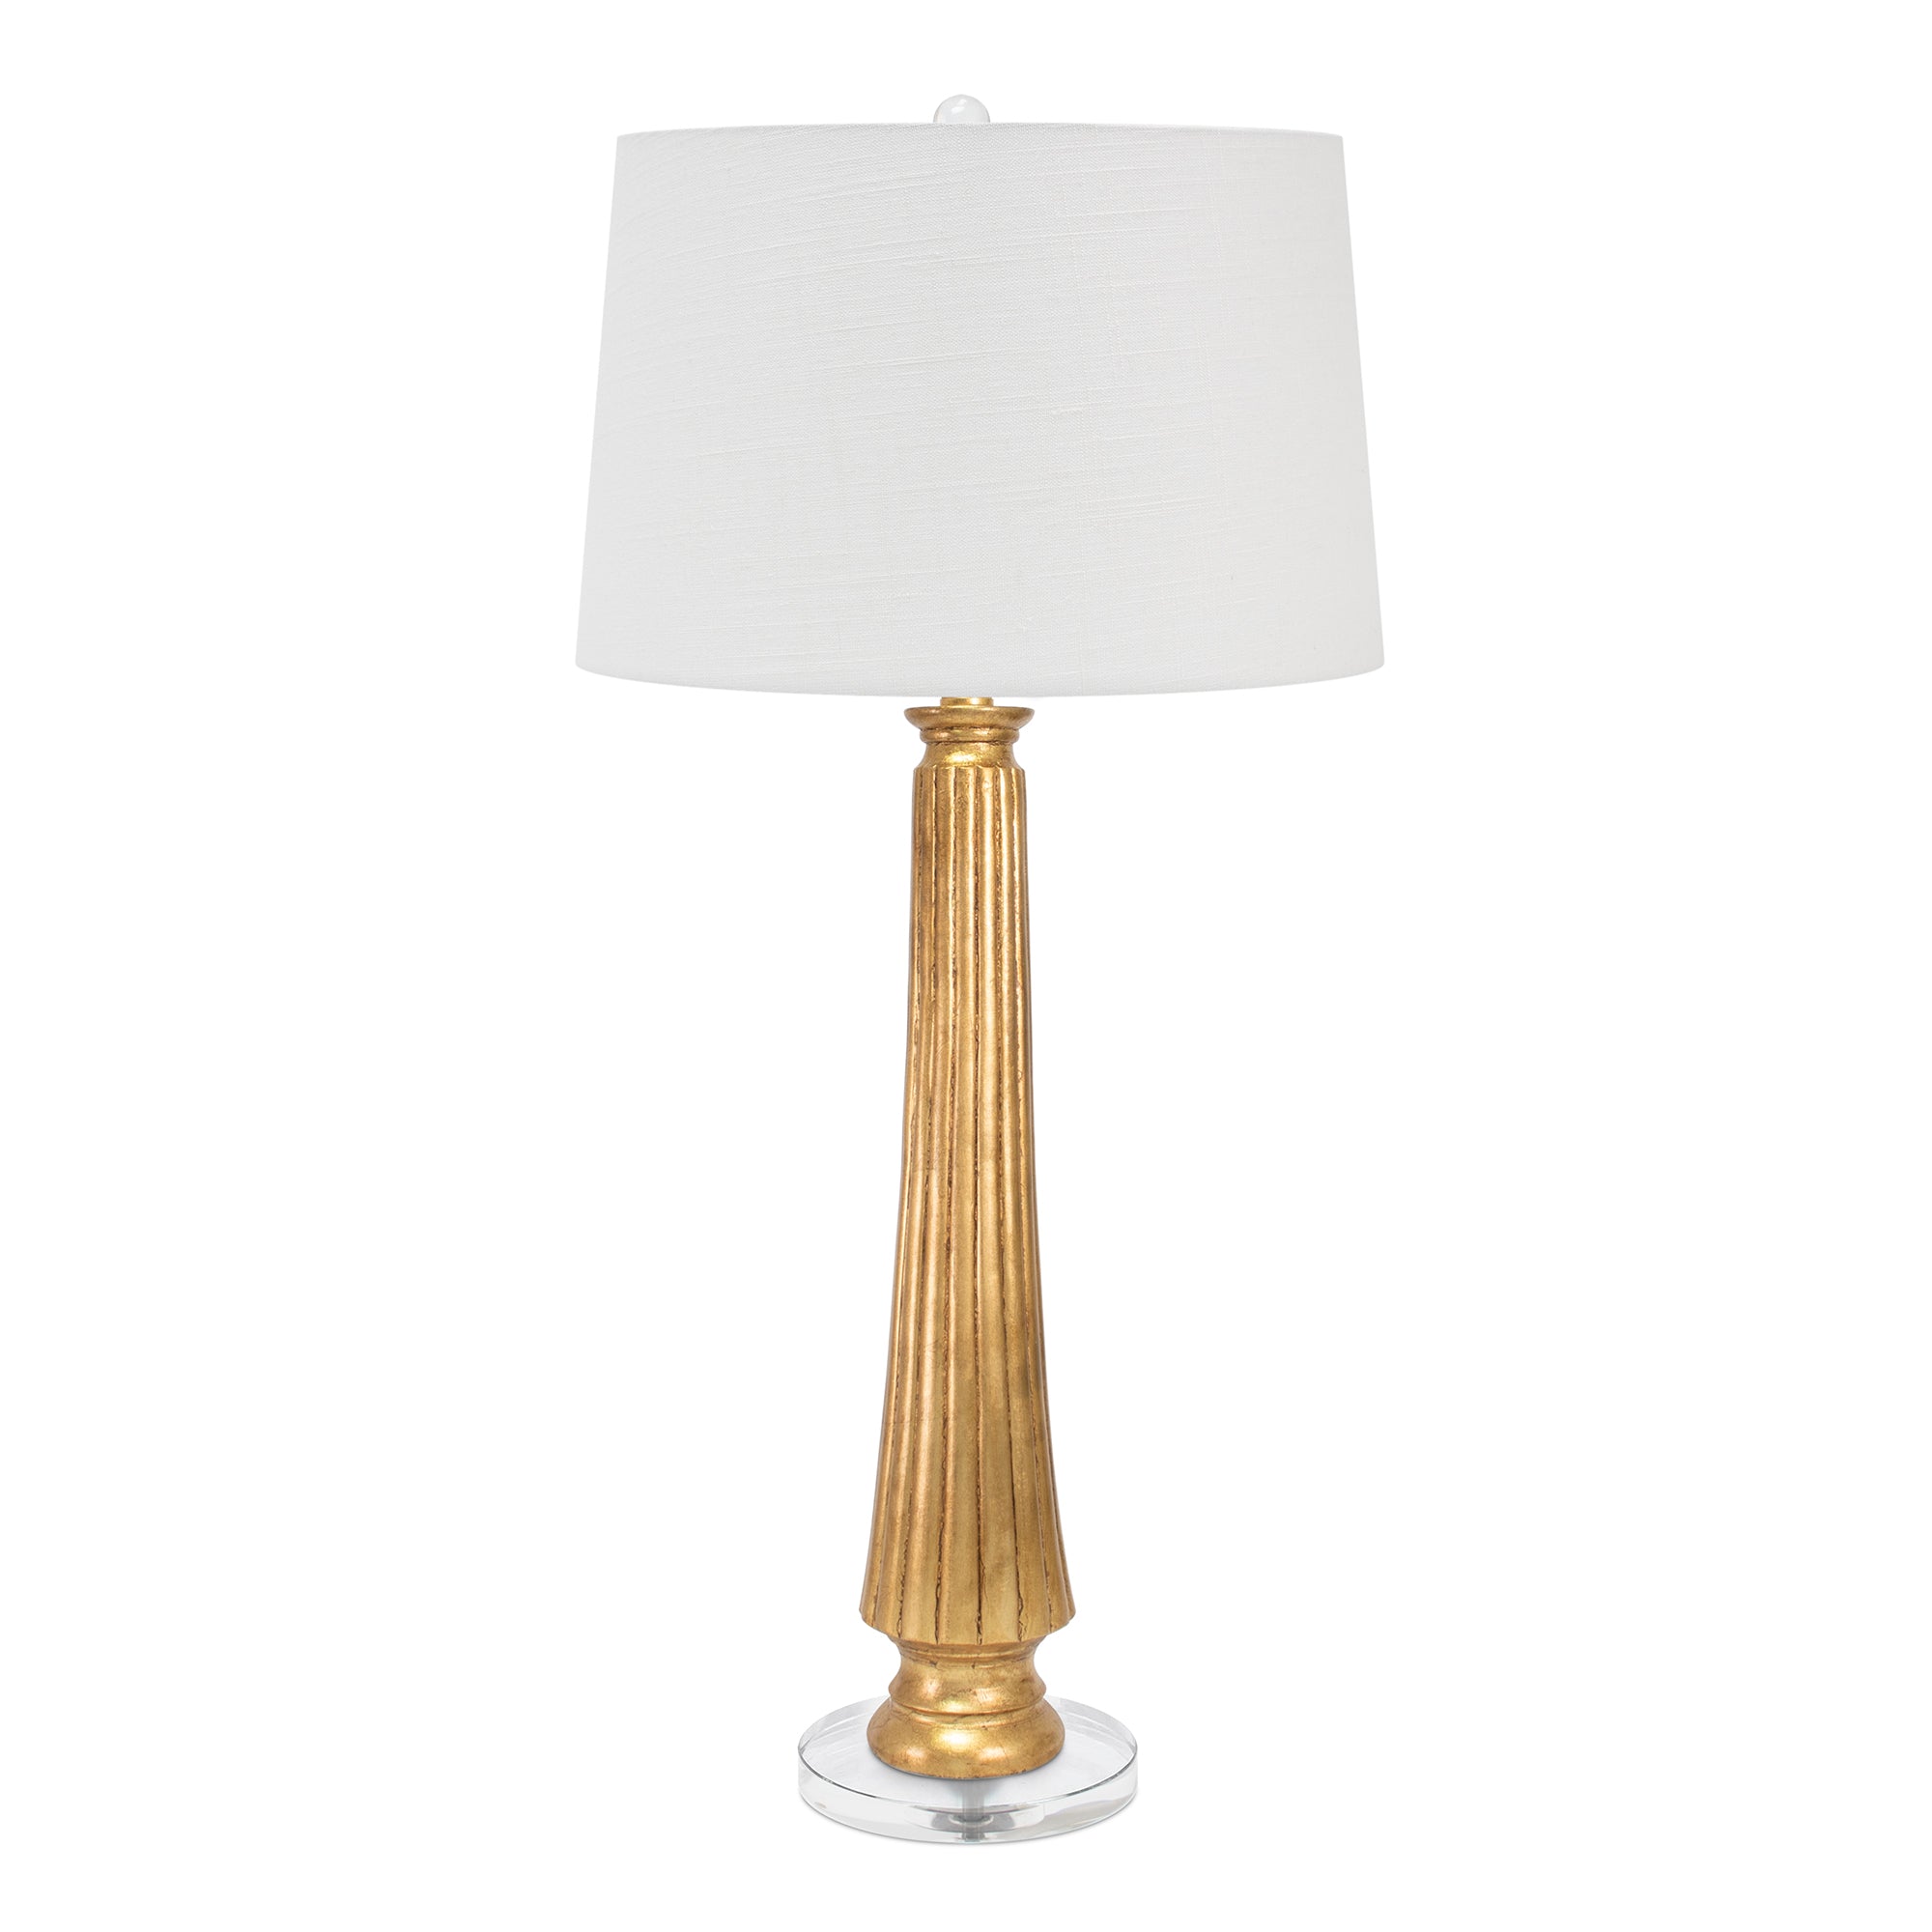 Gold Squire Table Lamp- with White Linen Shade featuring Gold lining - Couture Lamps